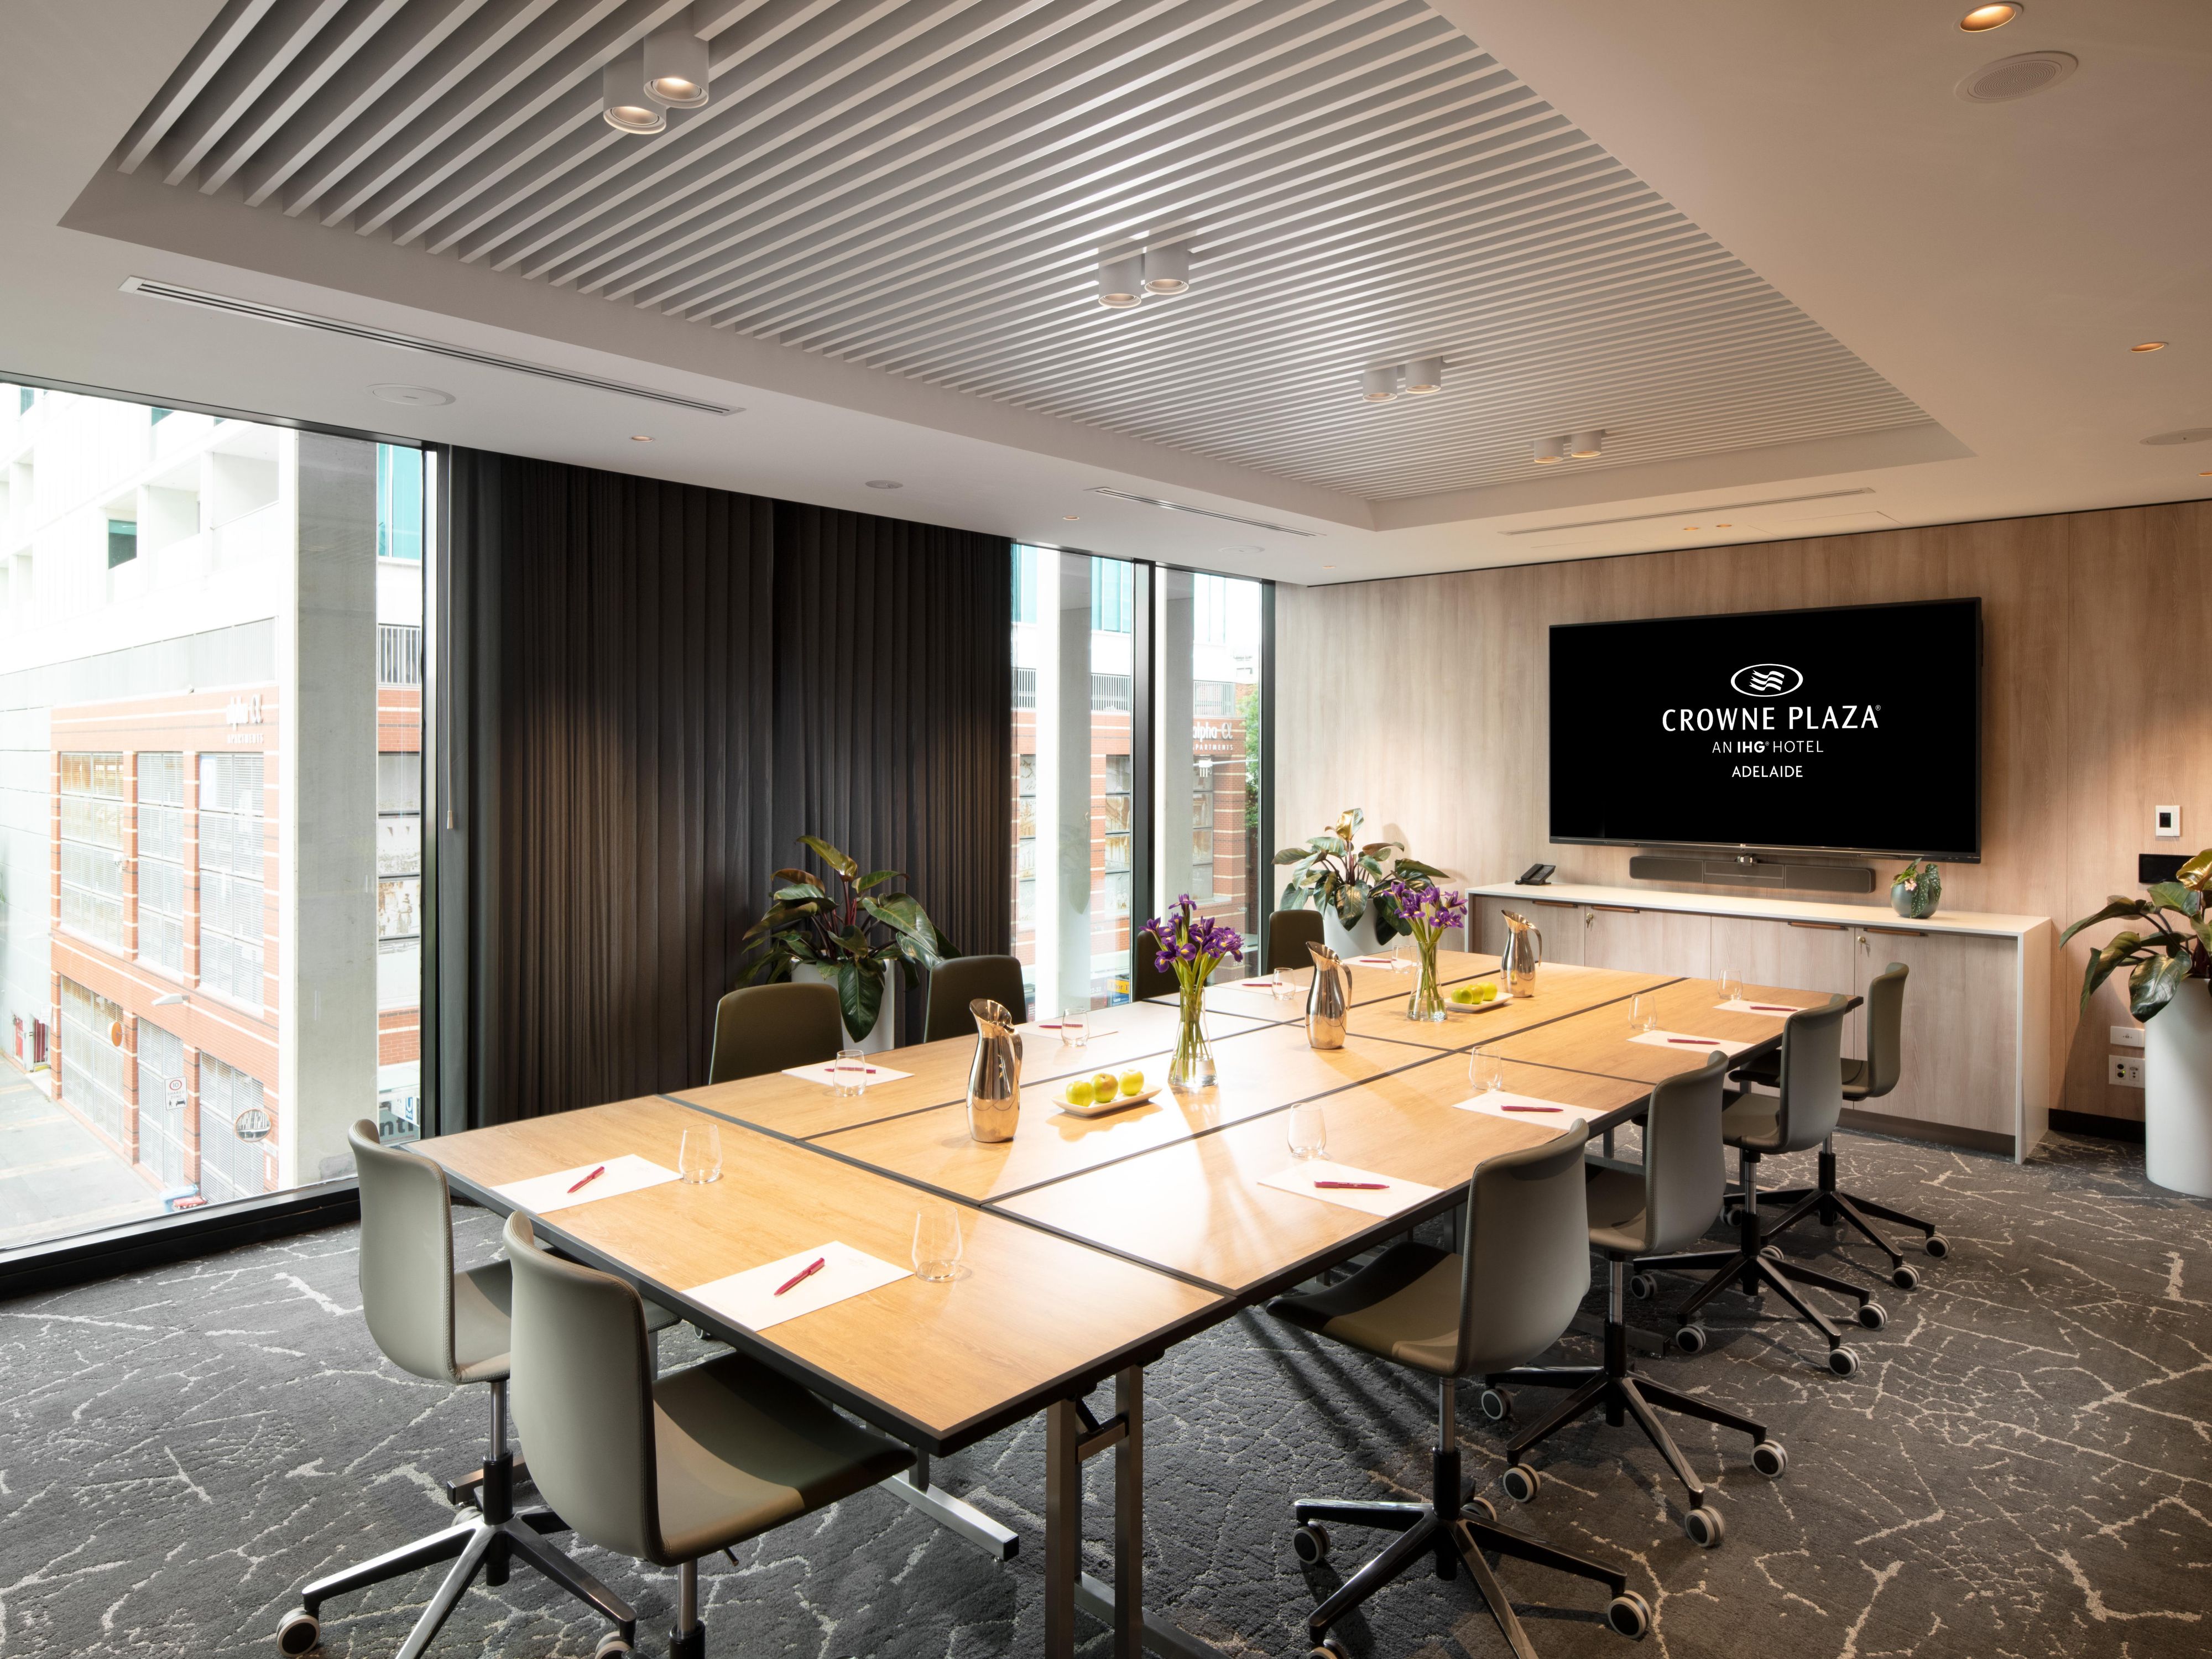 Crowne Plaza Adelaide houses inspiring and collaborative meeting spaces to gather, celebrate and connect. Be welcomed by floor-to- ceiling windows, natural light and panoramic views or request blackout. Park onsite and enjoy a seamless event experience with a dedicated Crowne Meetings Manager.